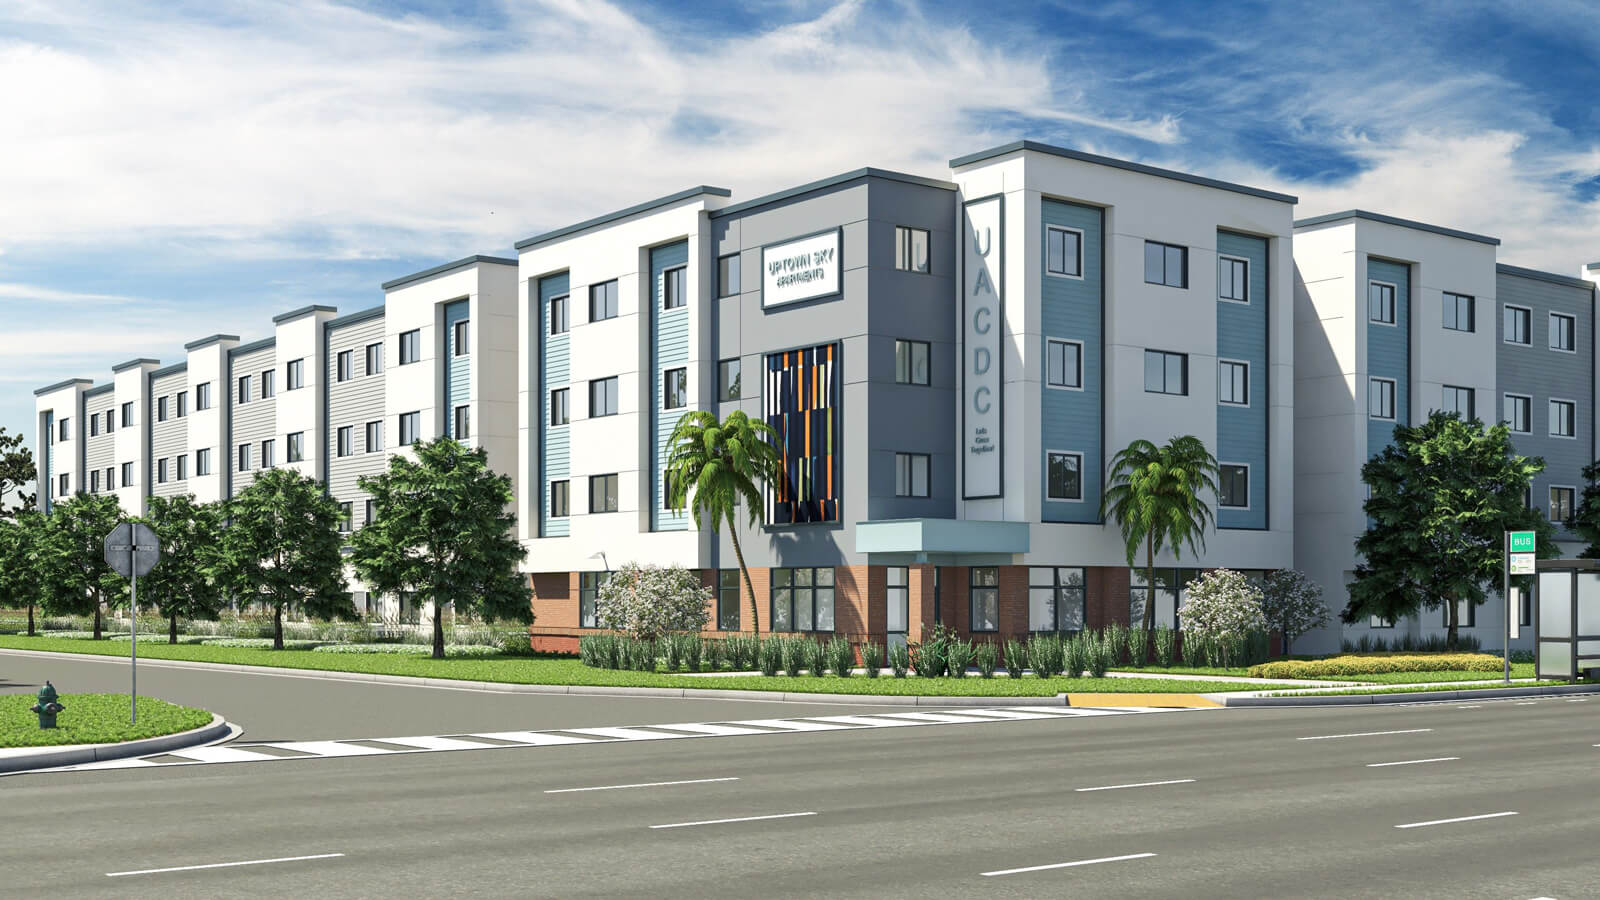 Artist rendering of the Uptown Sky multifamily apartment home development in Tampa, FL.